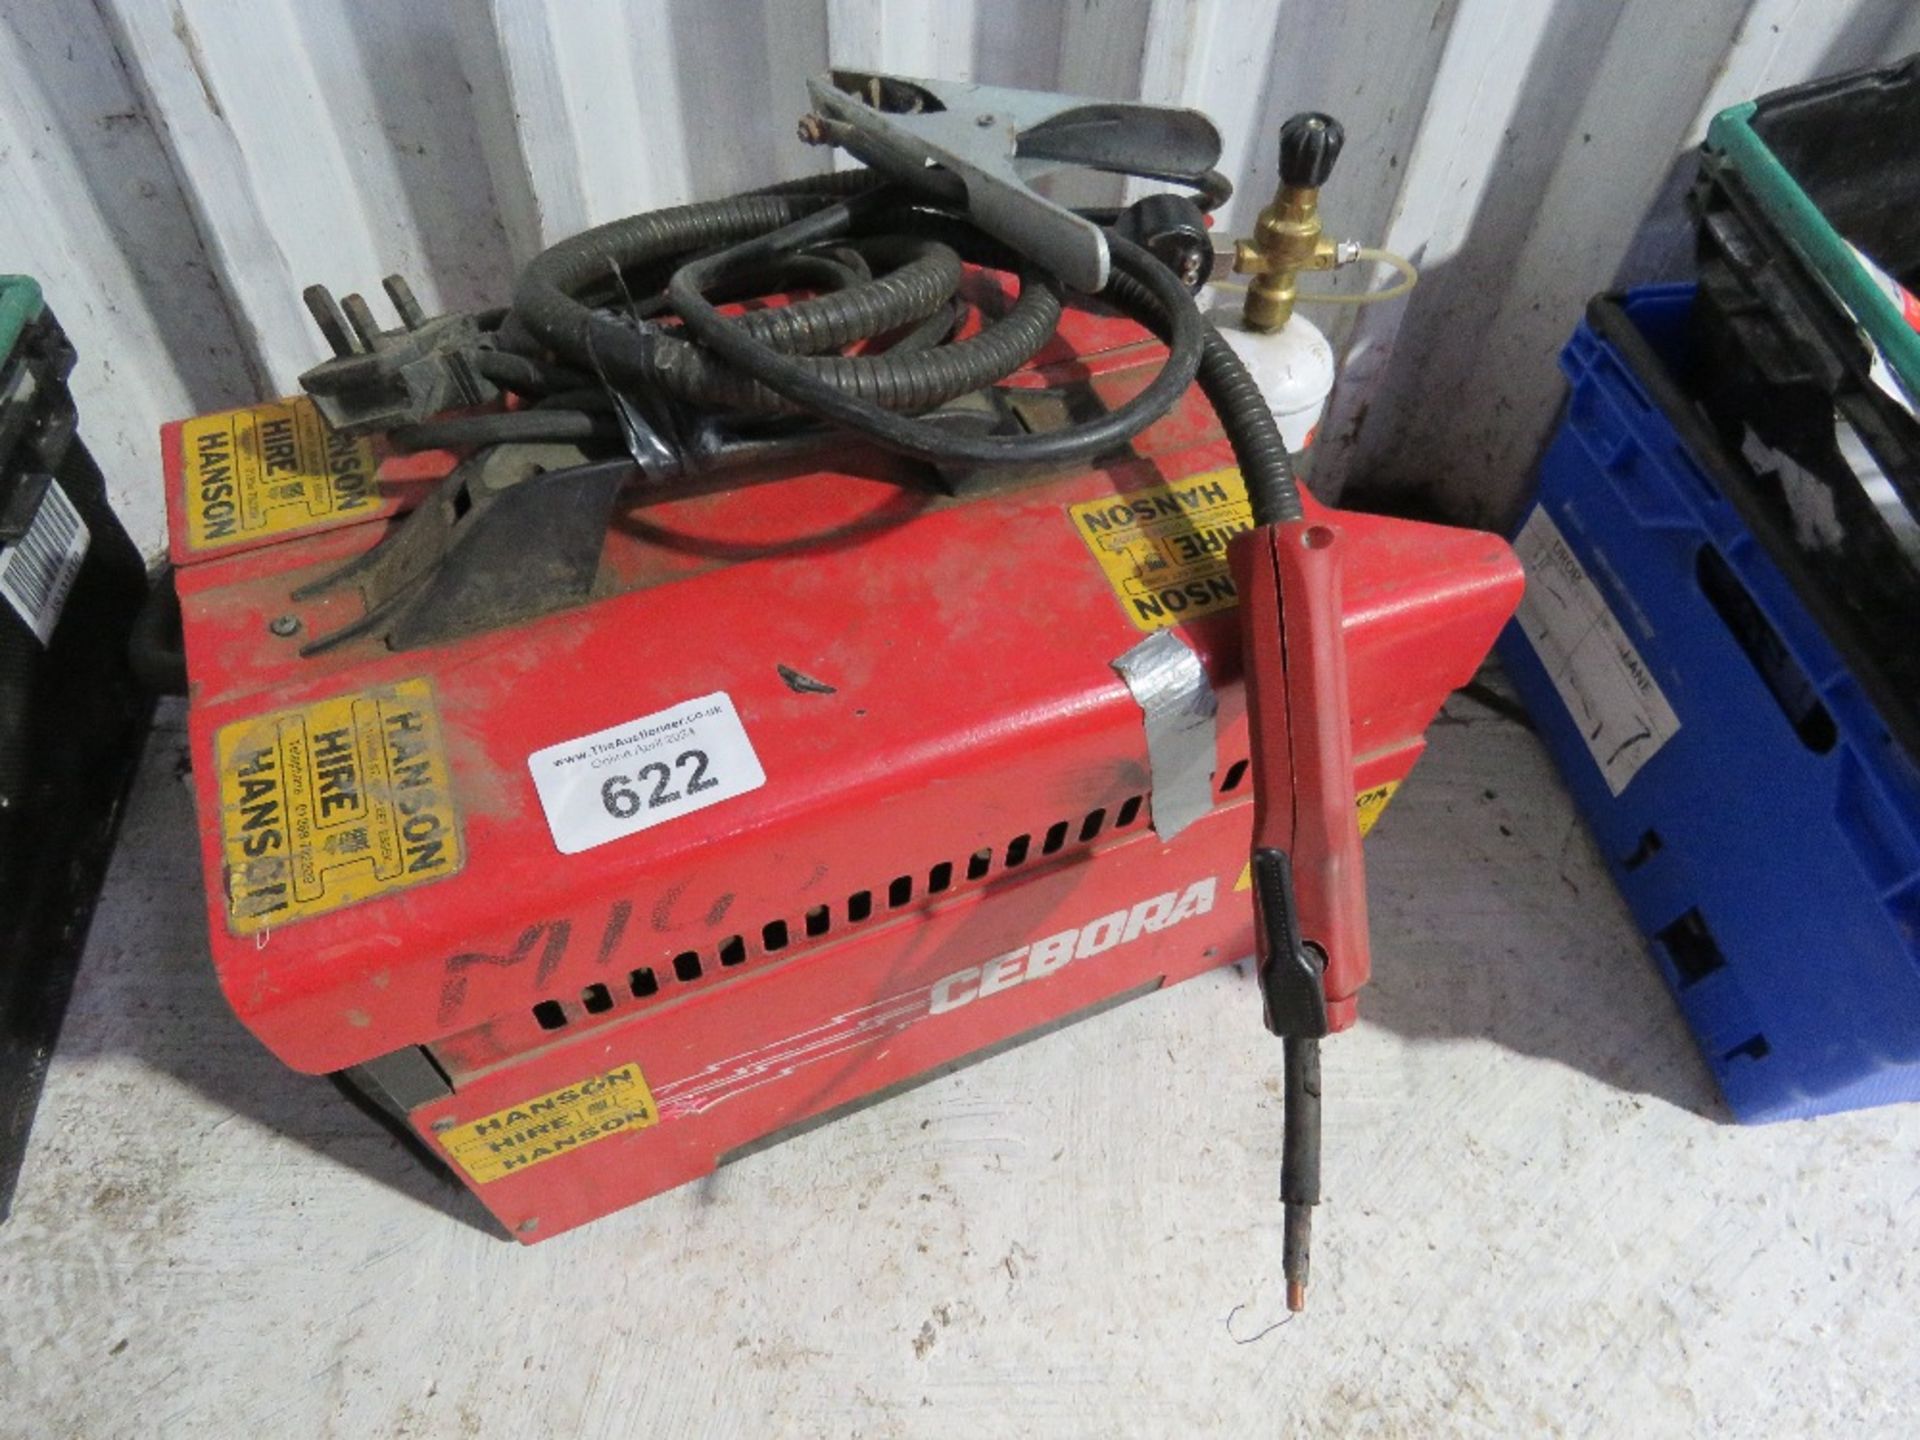 CEBORA 240VOLT MIG WEDLER PLUS SPARE GAS AS SHOWN.....THIS LOT IS SOLD UNDER THE AUCTIONEERS MARGIN - Image 4 of 4